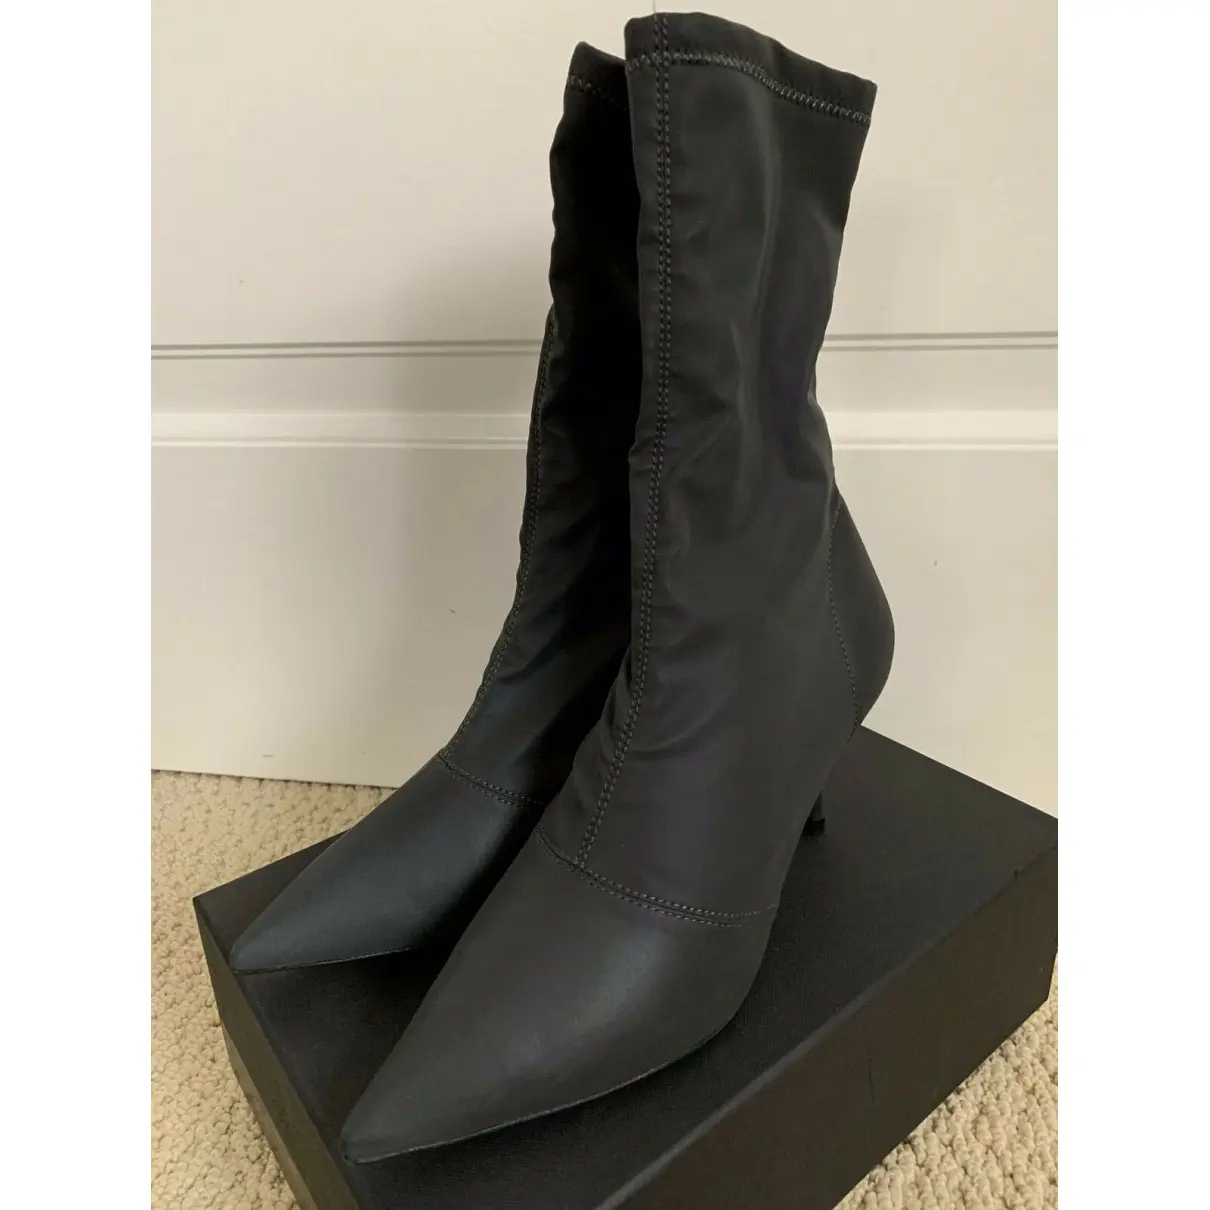 Yeezy Cloth ankle boots for sale